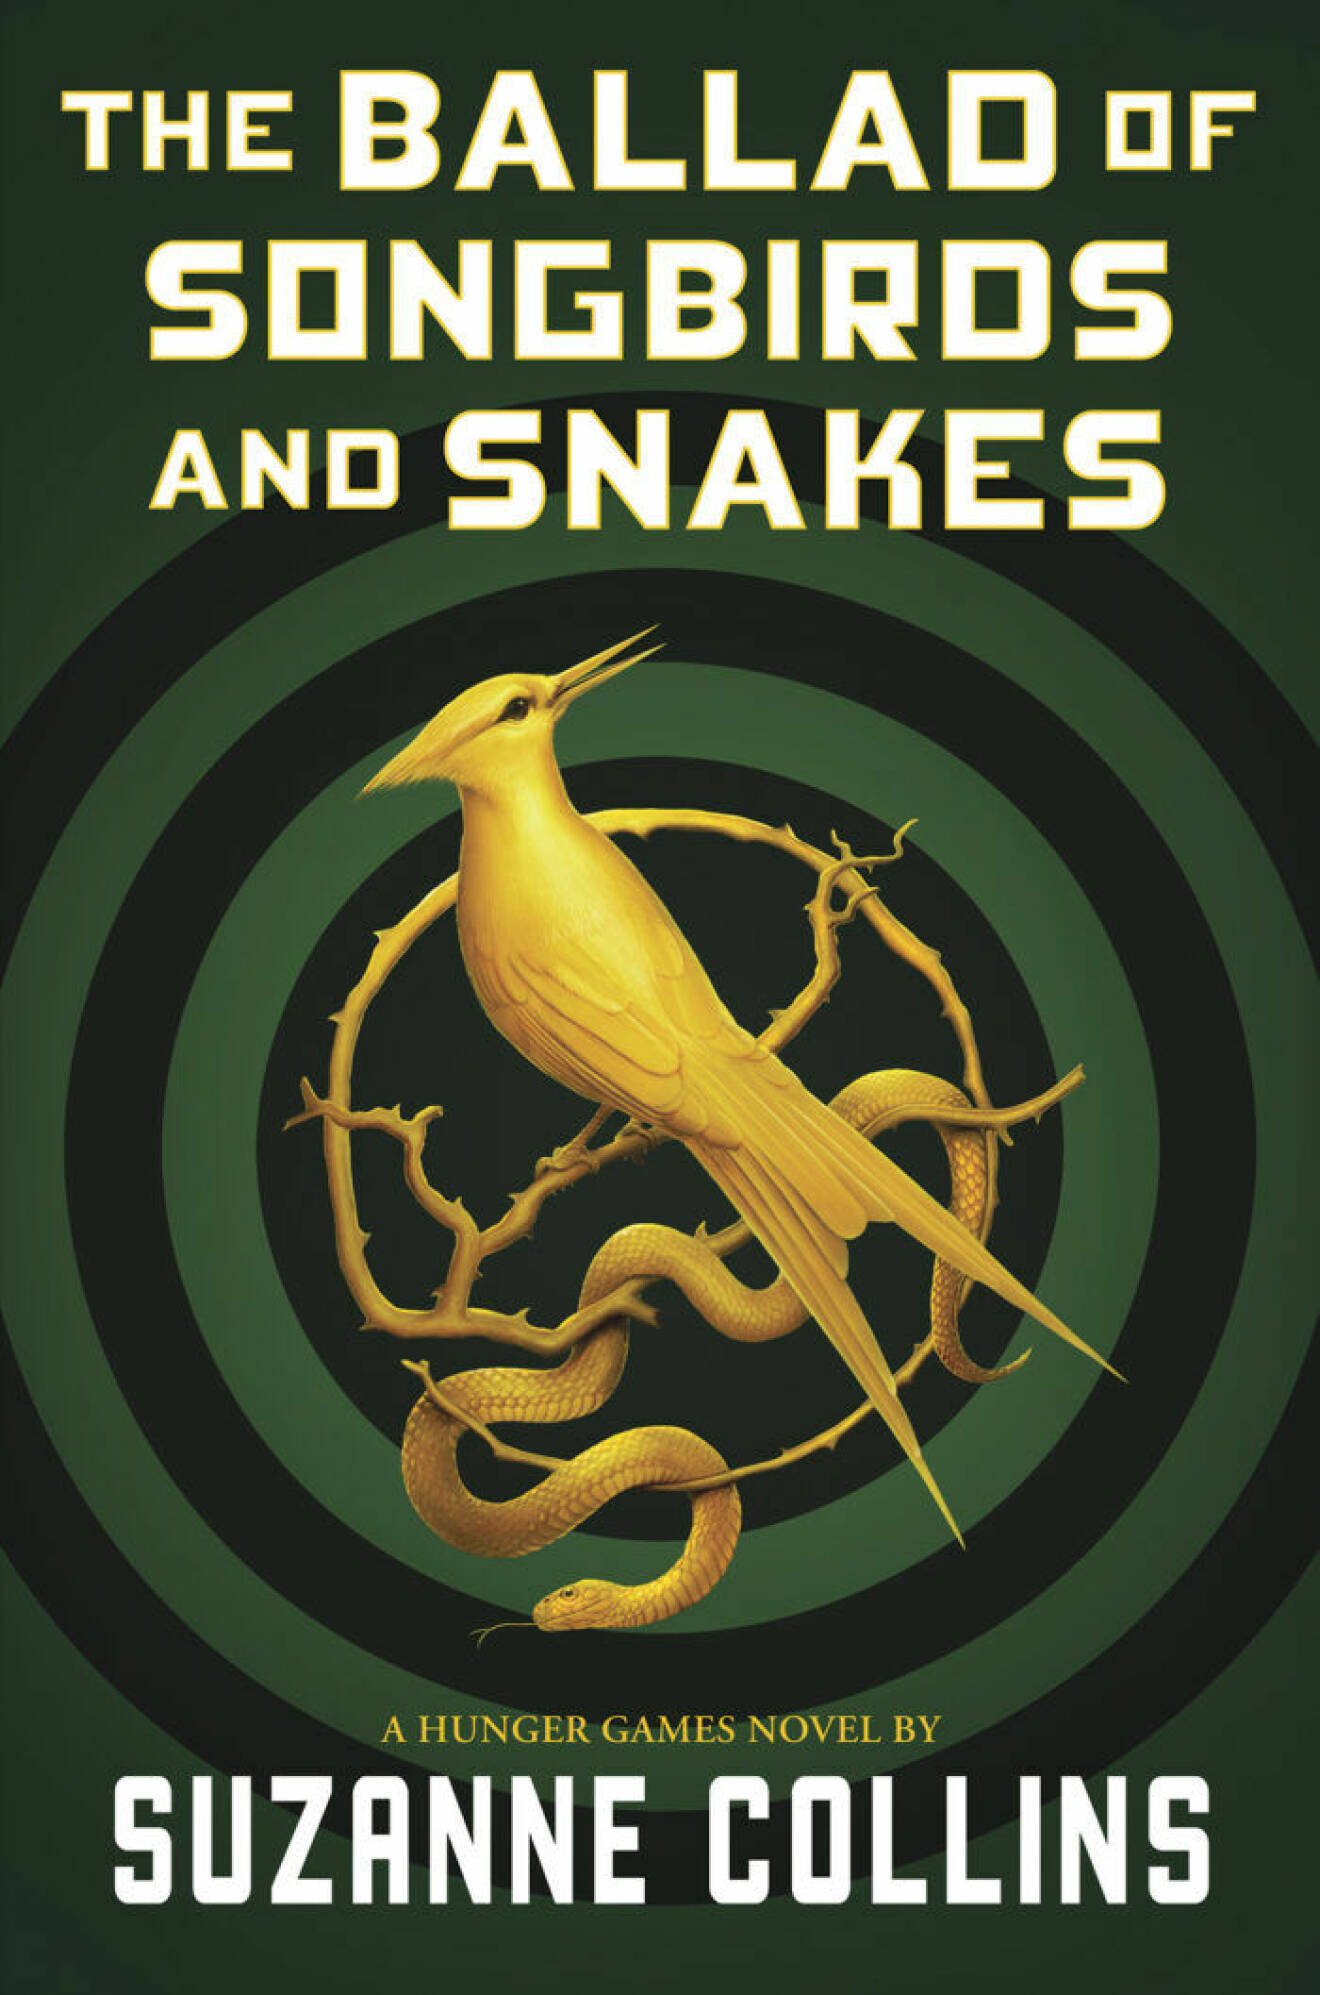 The Ballad of songbirds and snakes. 